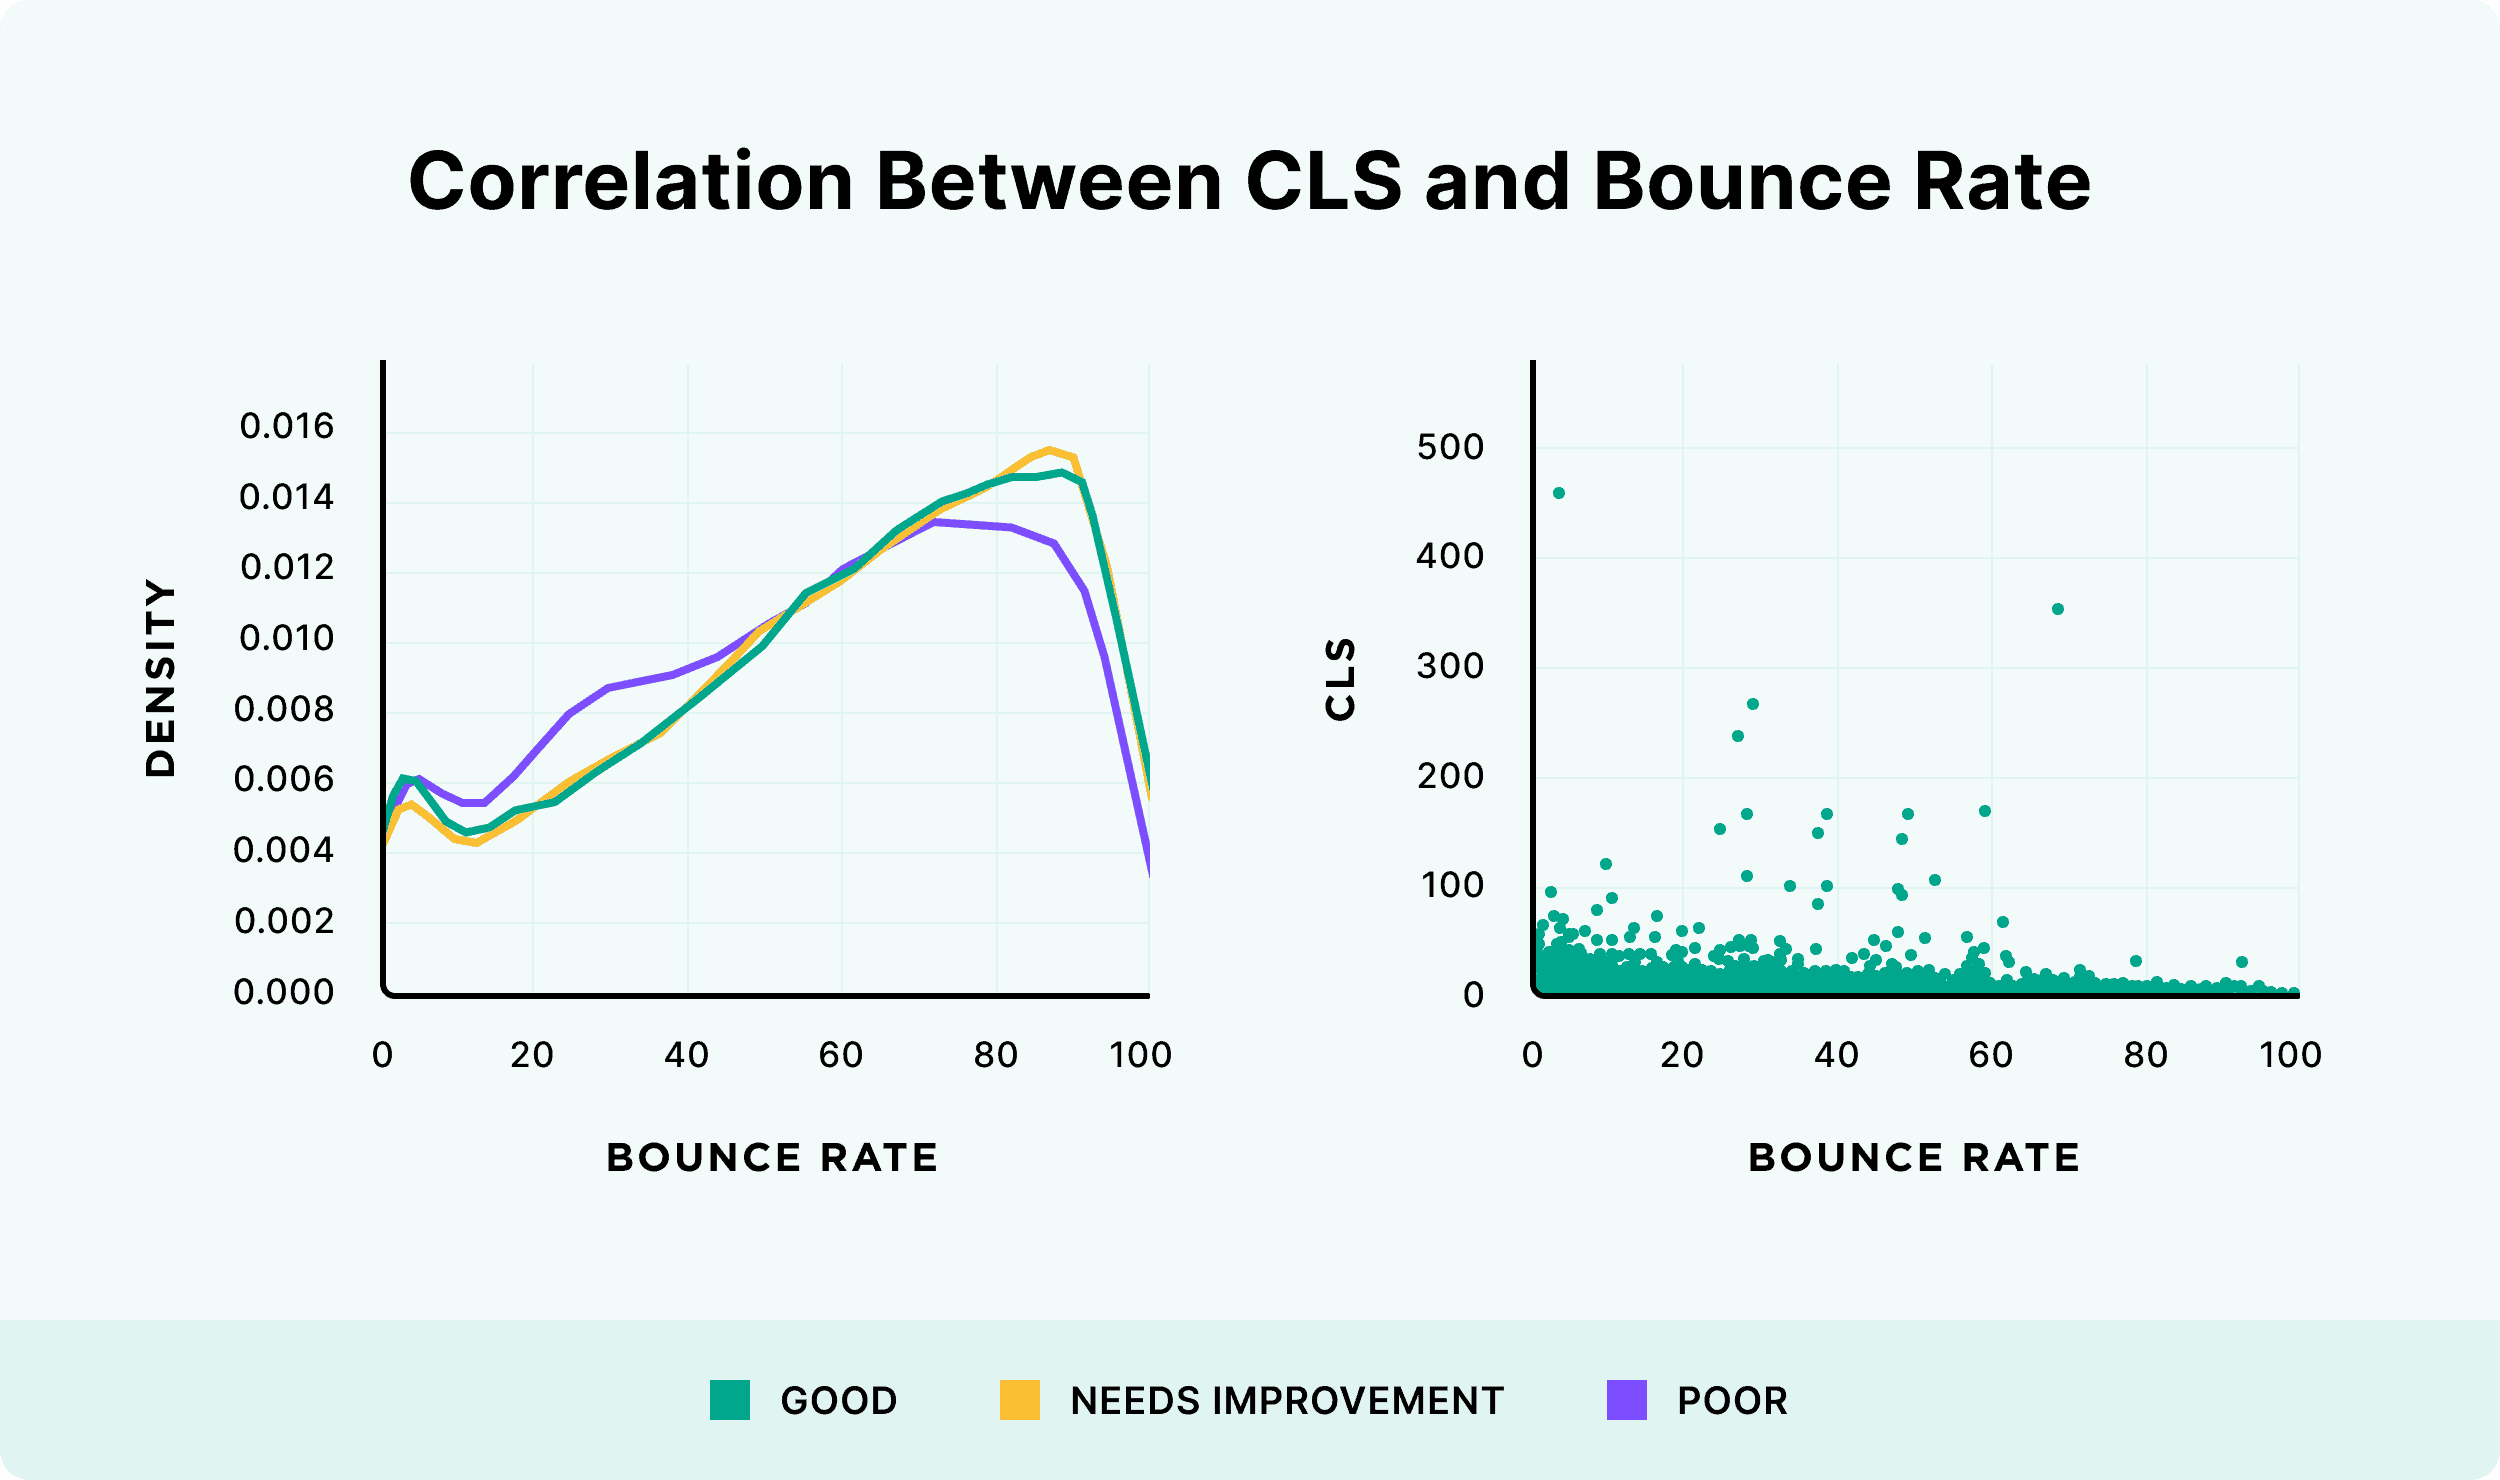 Correlation between CLS and bounce rate